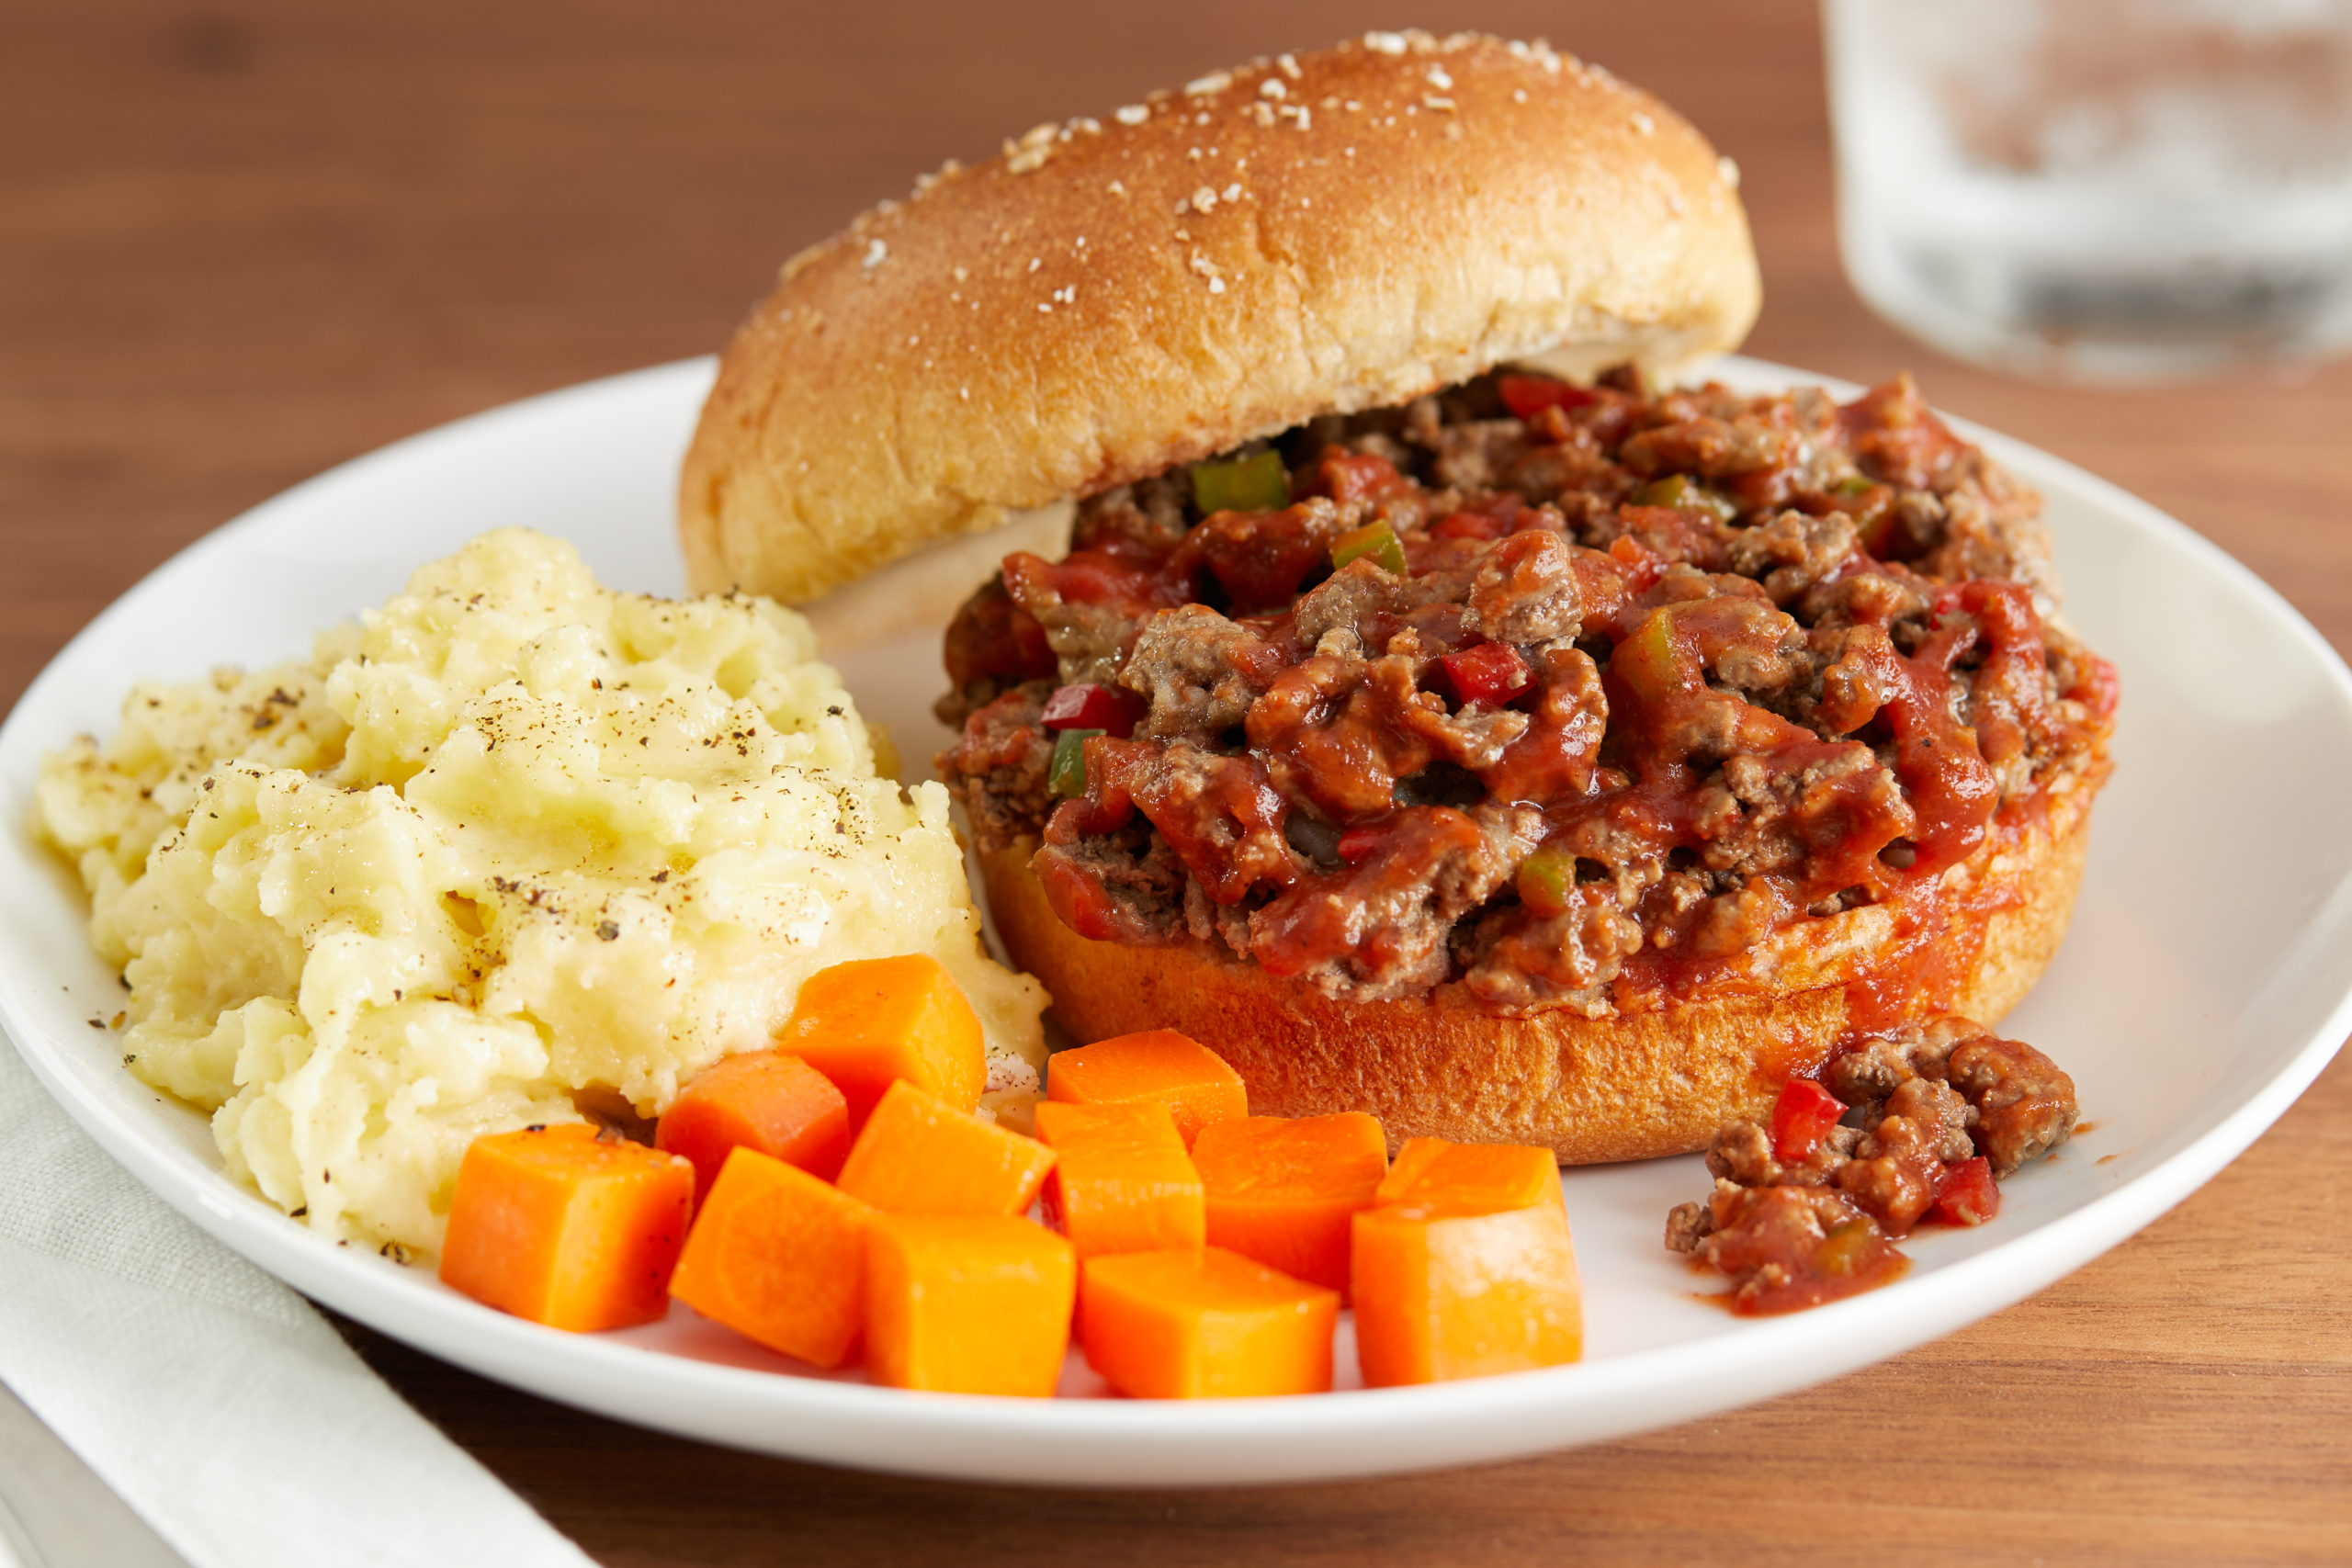 Sloppy joe meal with mashed potatoes and carrots